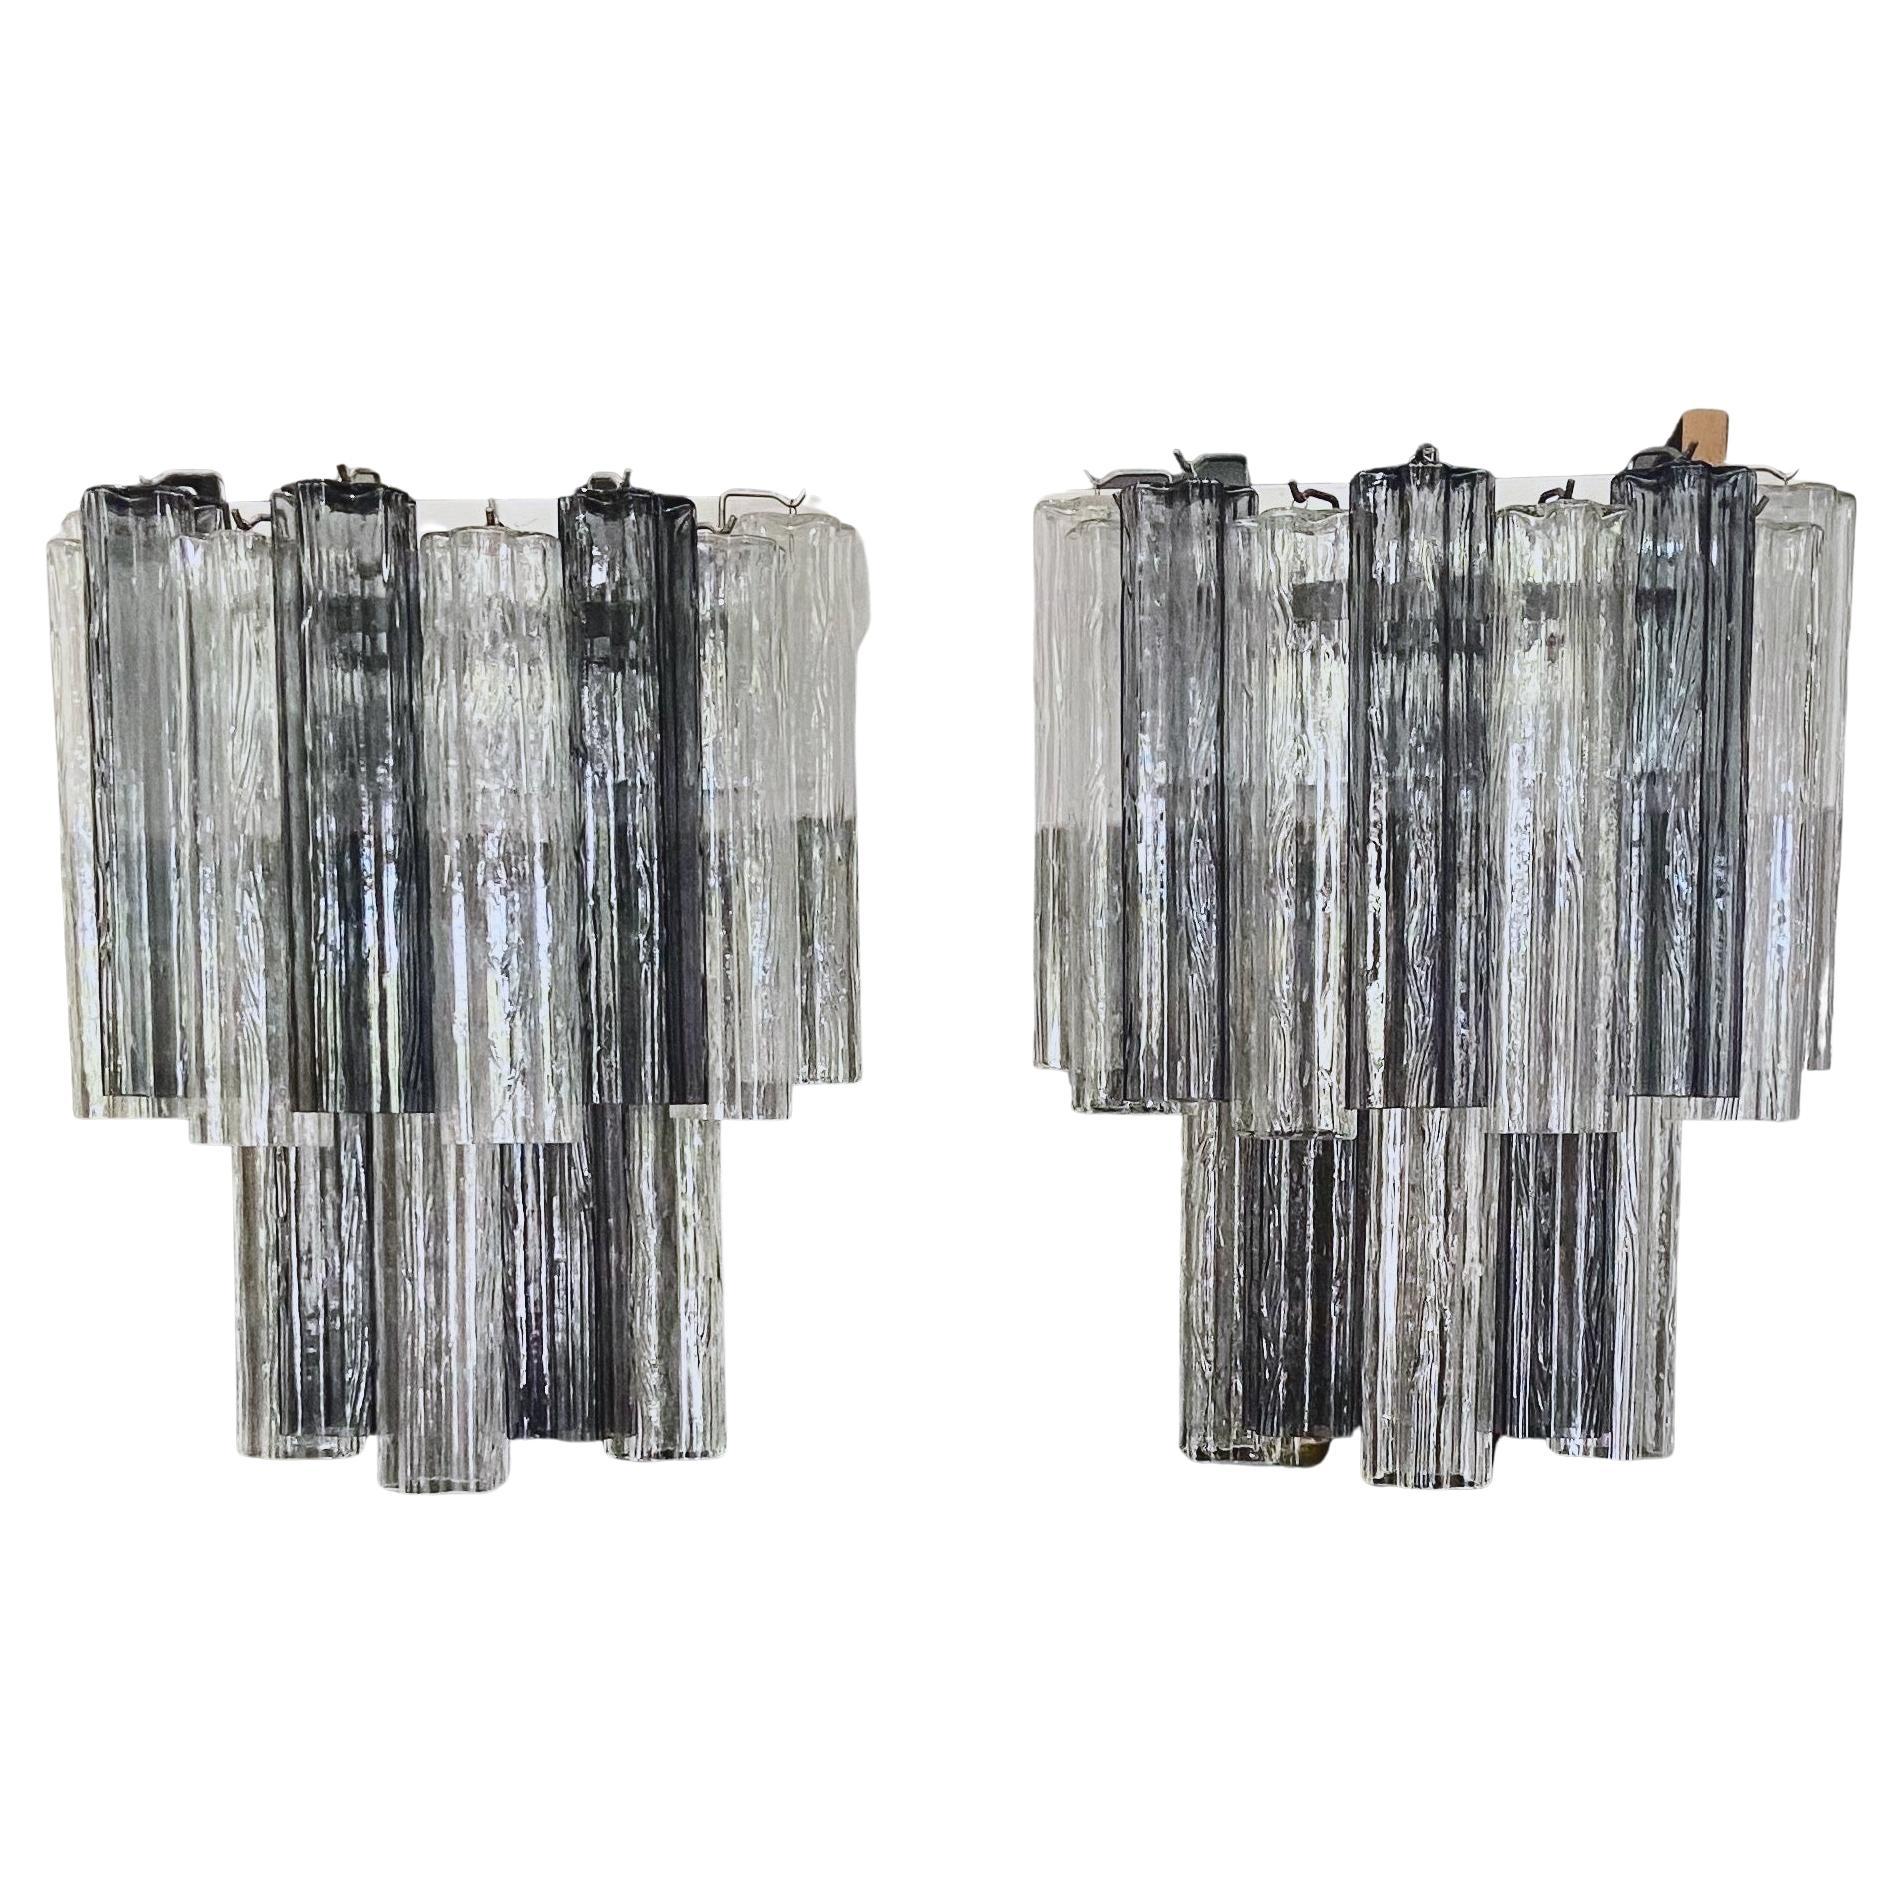 Pair of large Italian Tronchi glass wall sconces with chrome plated backplates. The color of the murano glass tubes are combination clear and smoke grey. Each sconce uses 6 candelabra base bulbs.